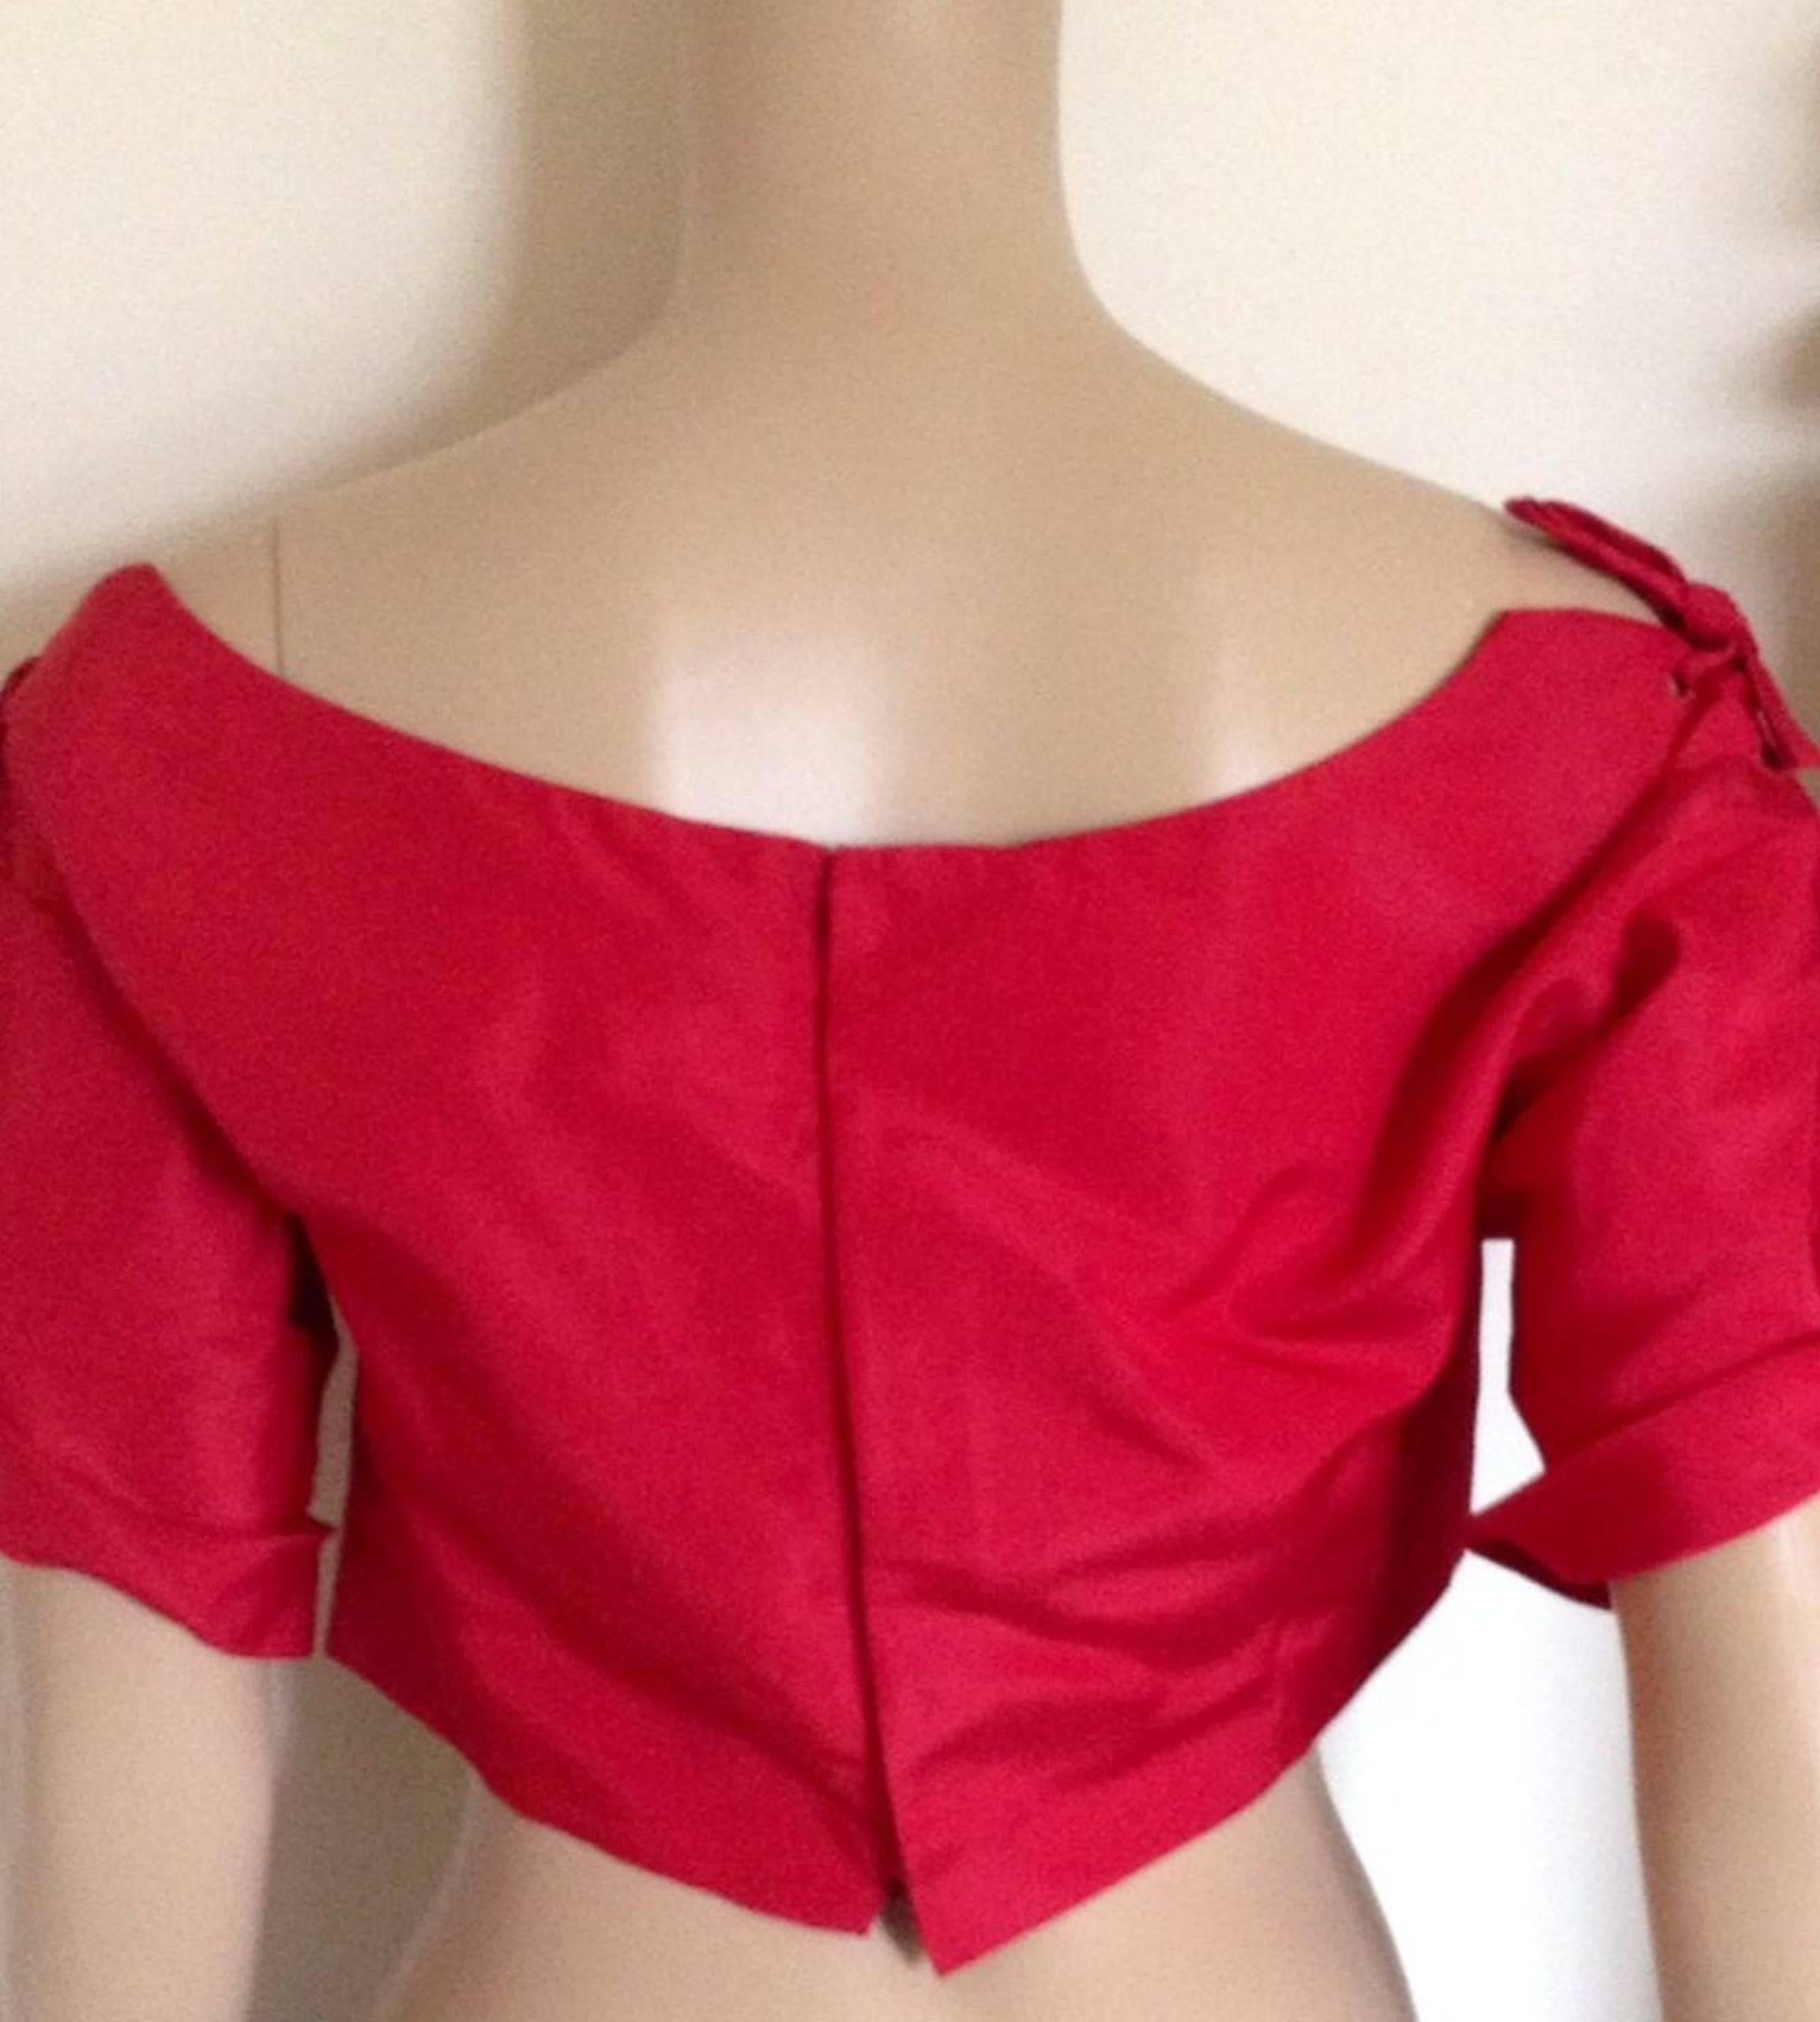 1953 Christian Dior Red Silk Bolero Jacket with Bow Details In Excellent Condition For Sale In London, UK